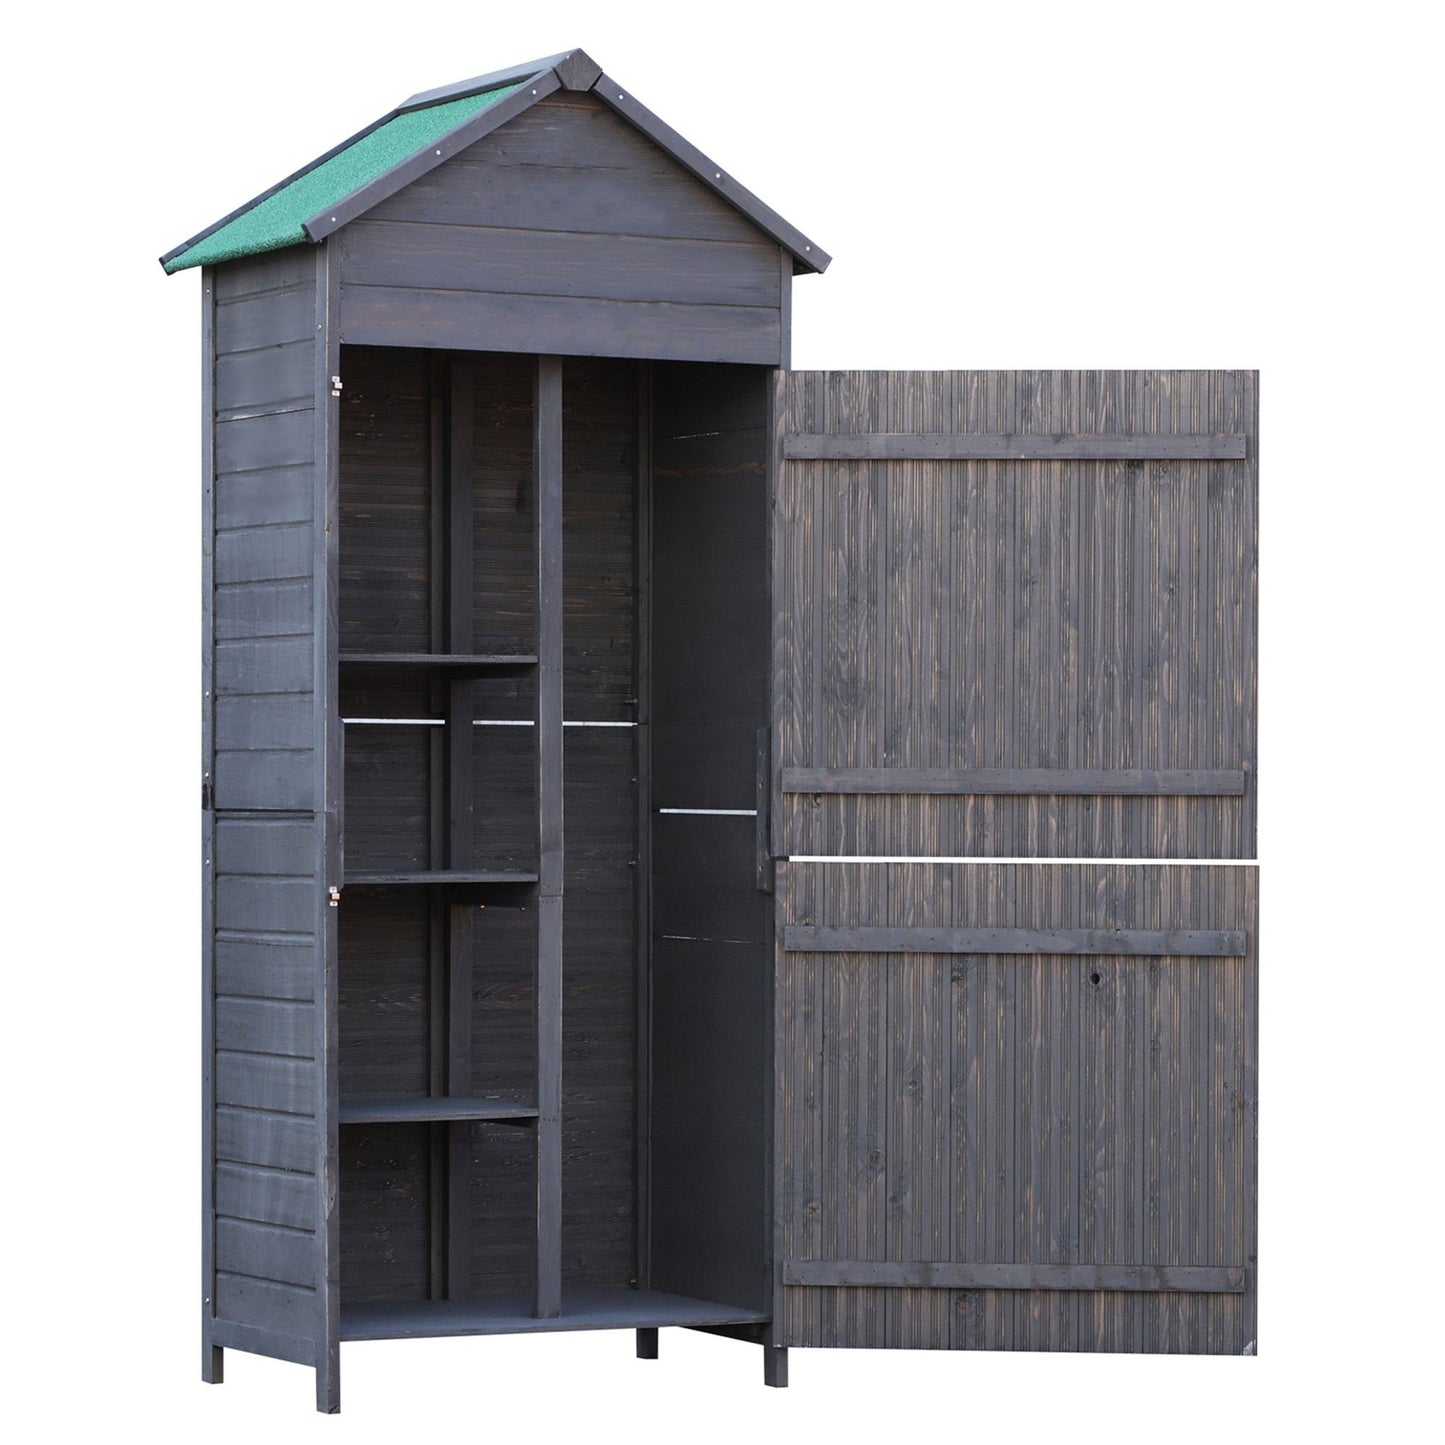 Outsunny 1.7 x 2.1ft Fir Wood Two Door Narrow Garden Shed - Grey